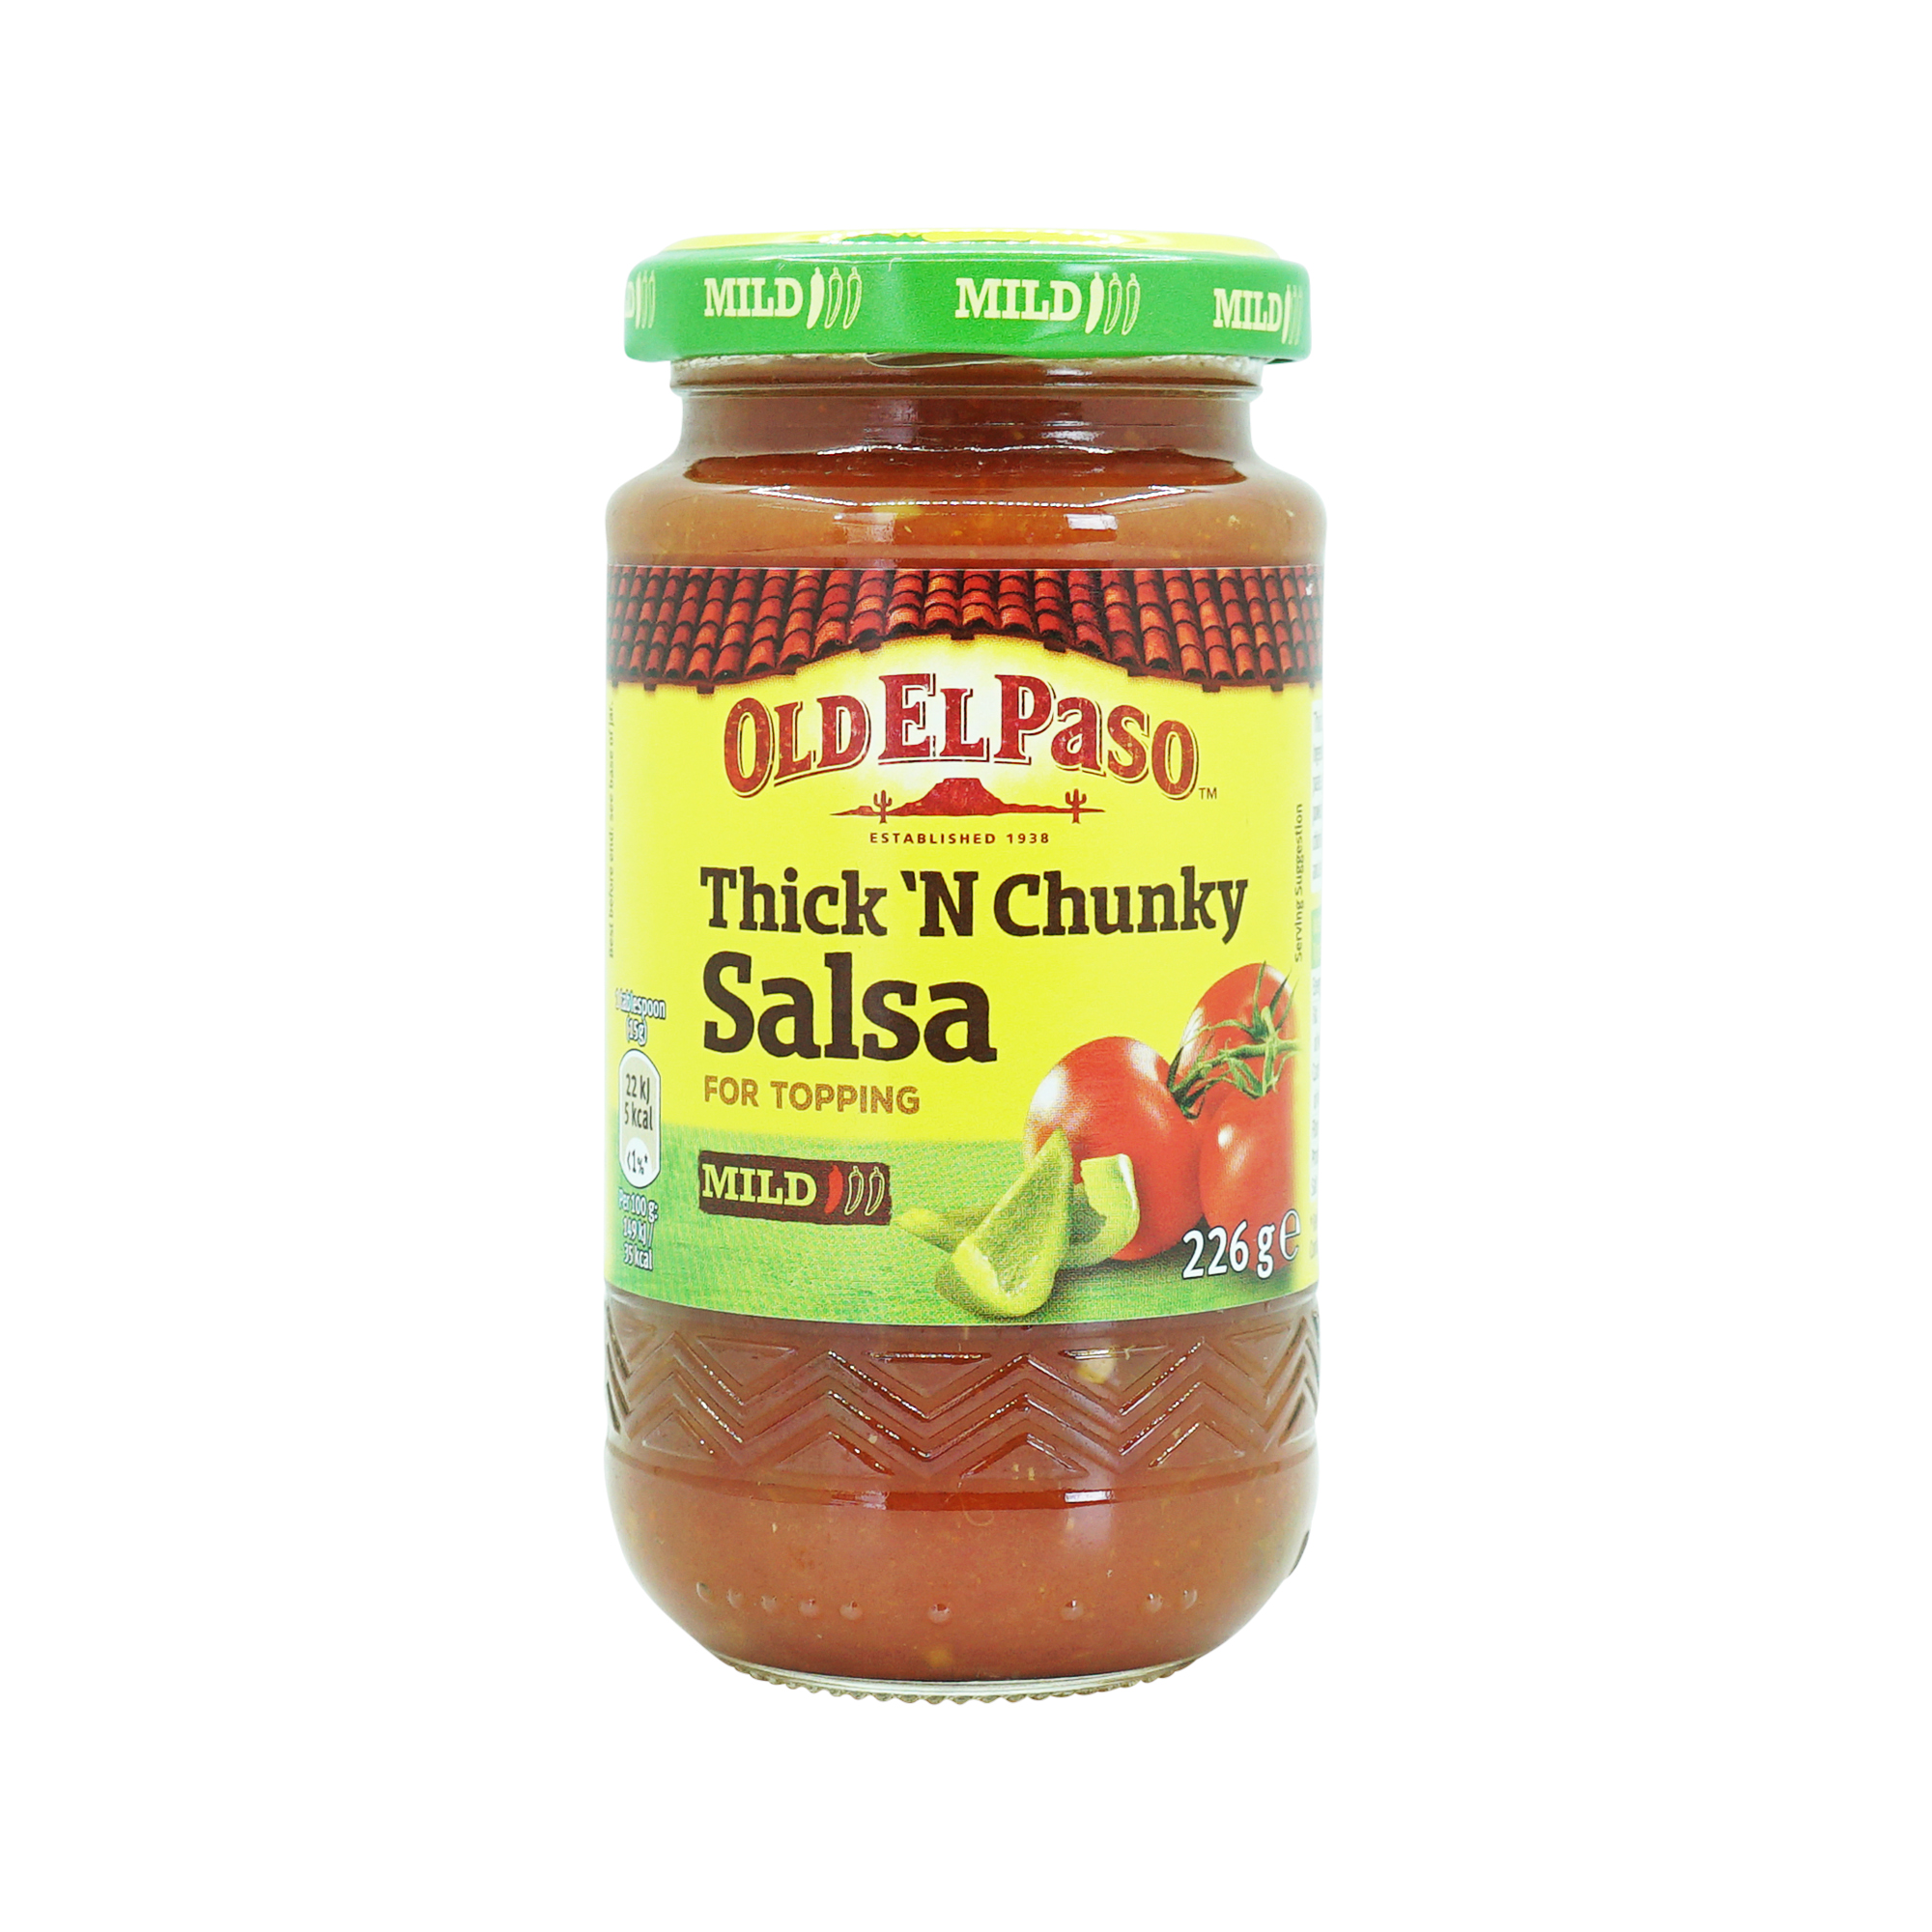 Old El Paso Thick 'n' Chunky Salsa Mild (226g)